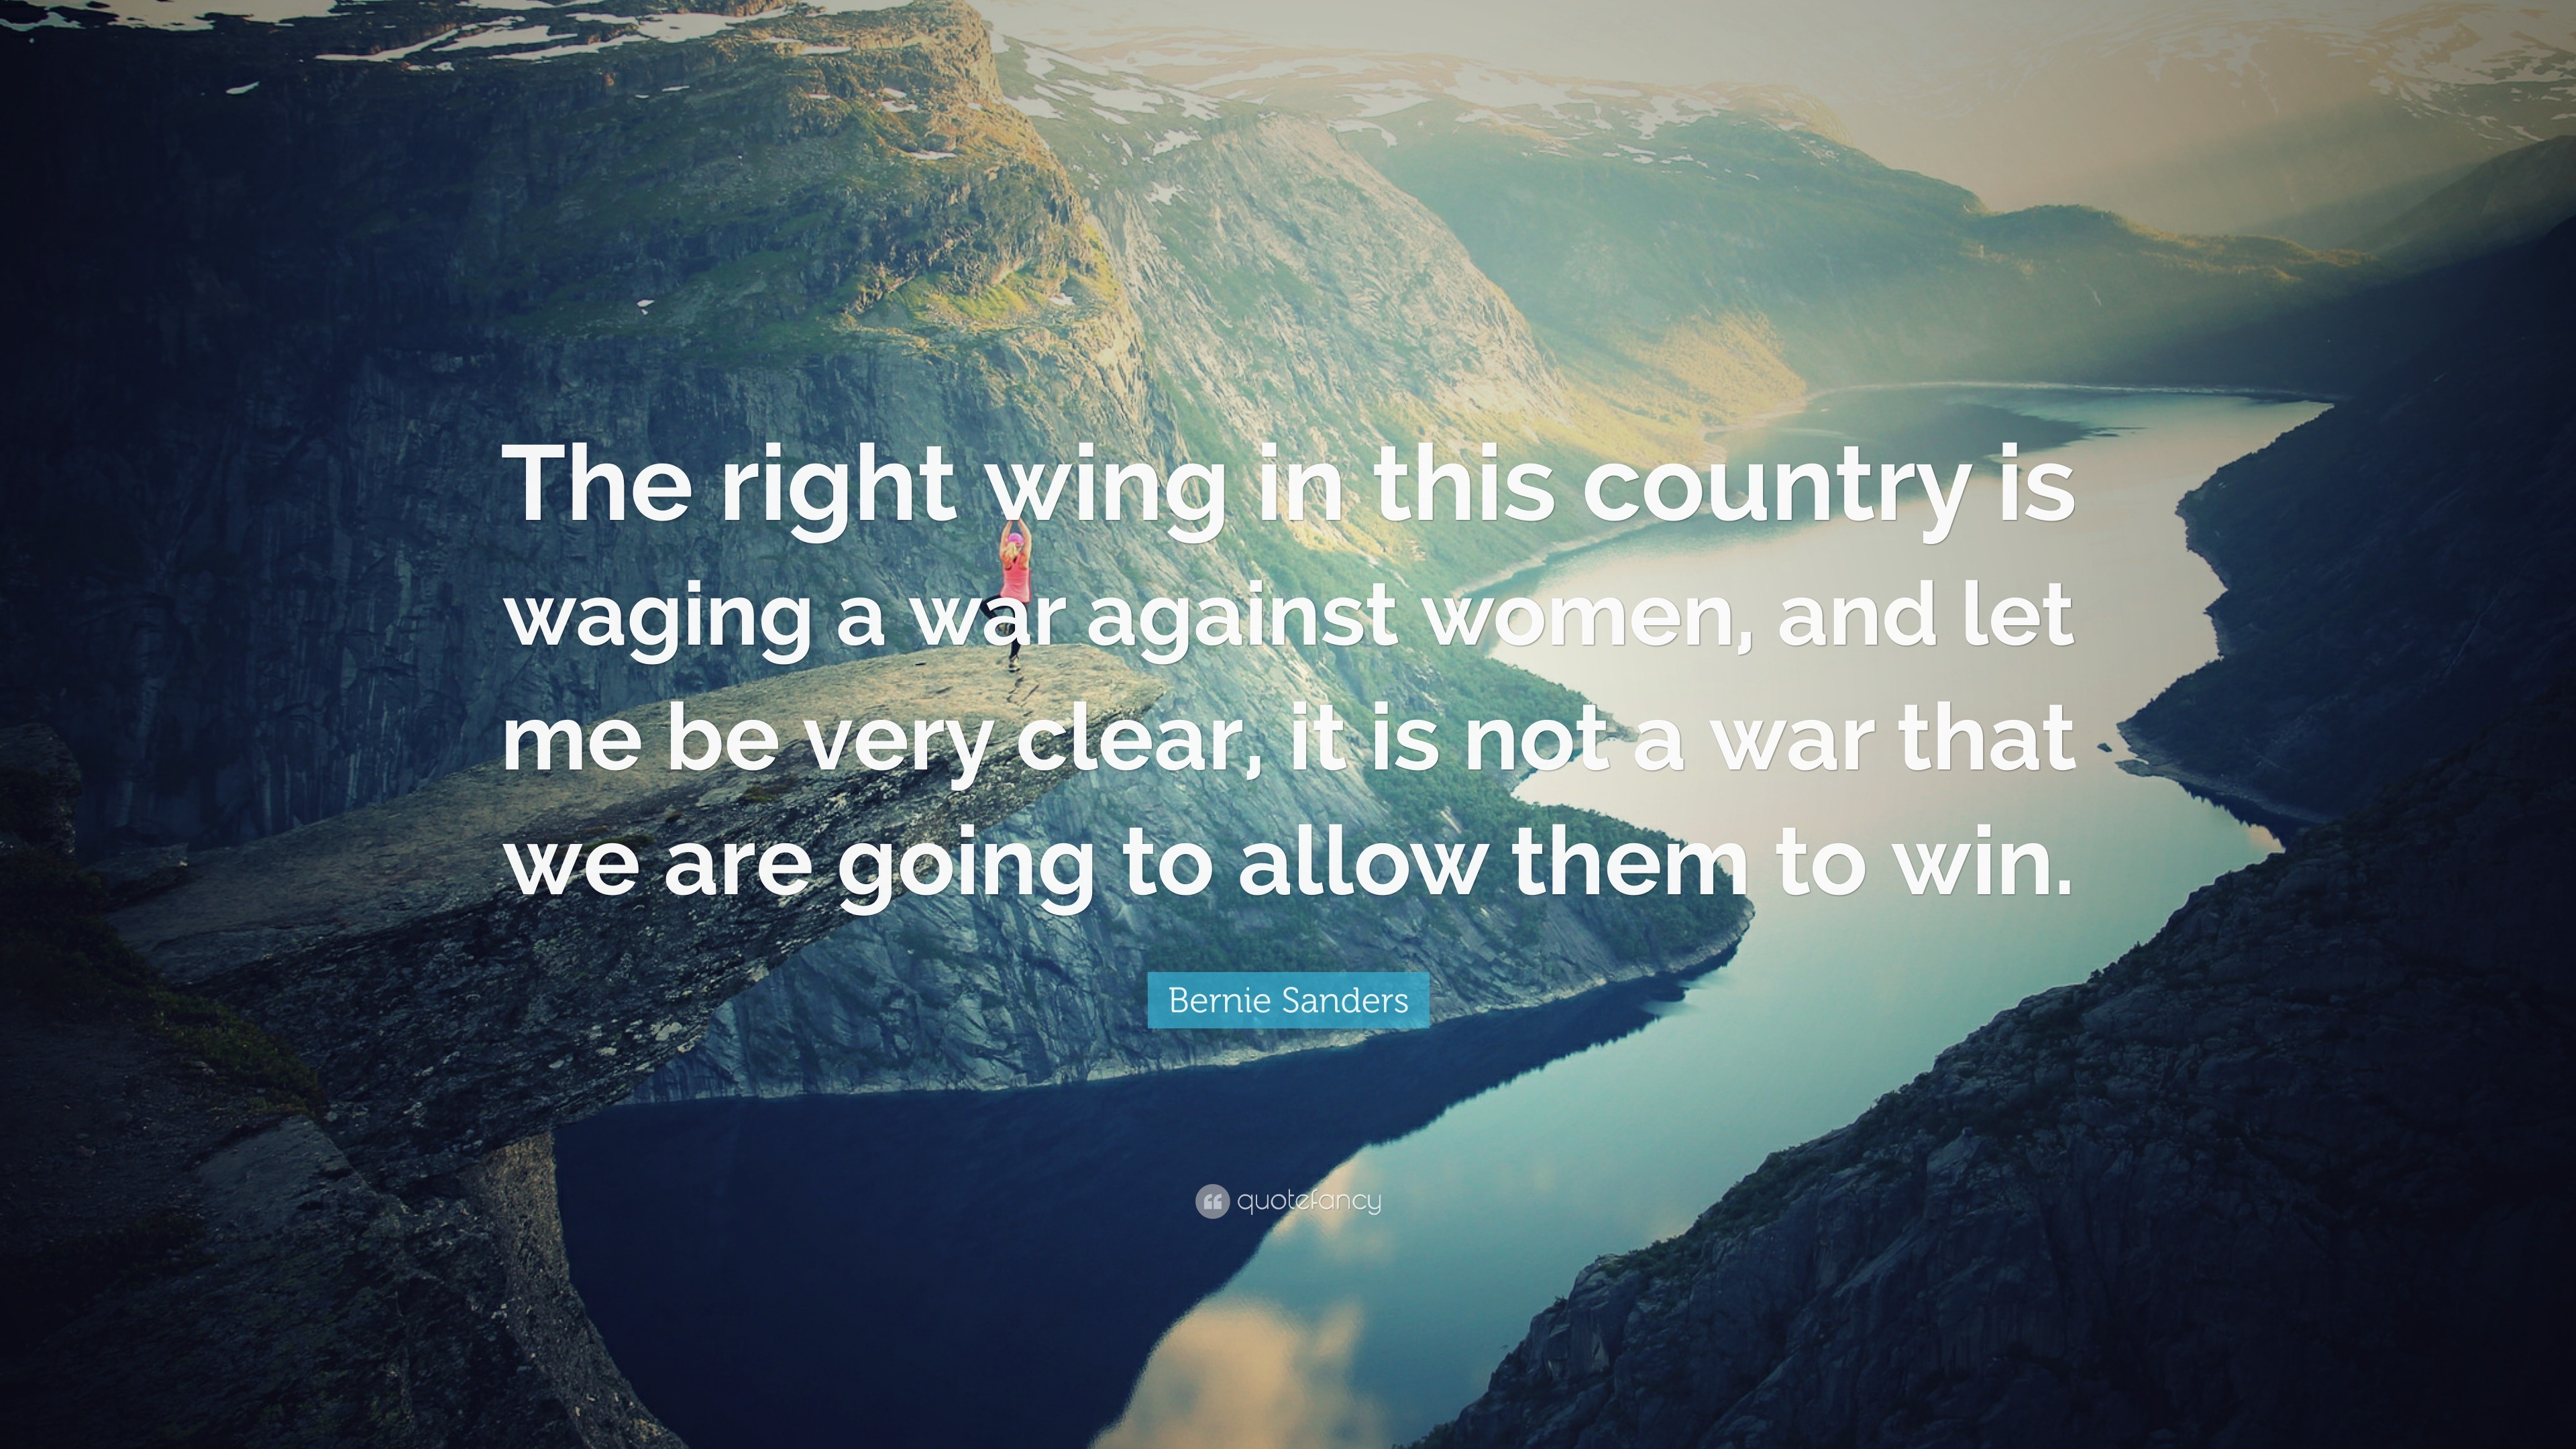 Bernie Sanders Quote: “The right wing in this country is waging a war ...